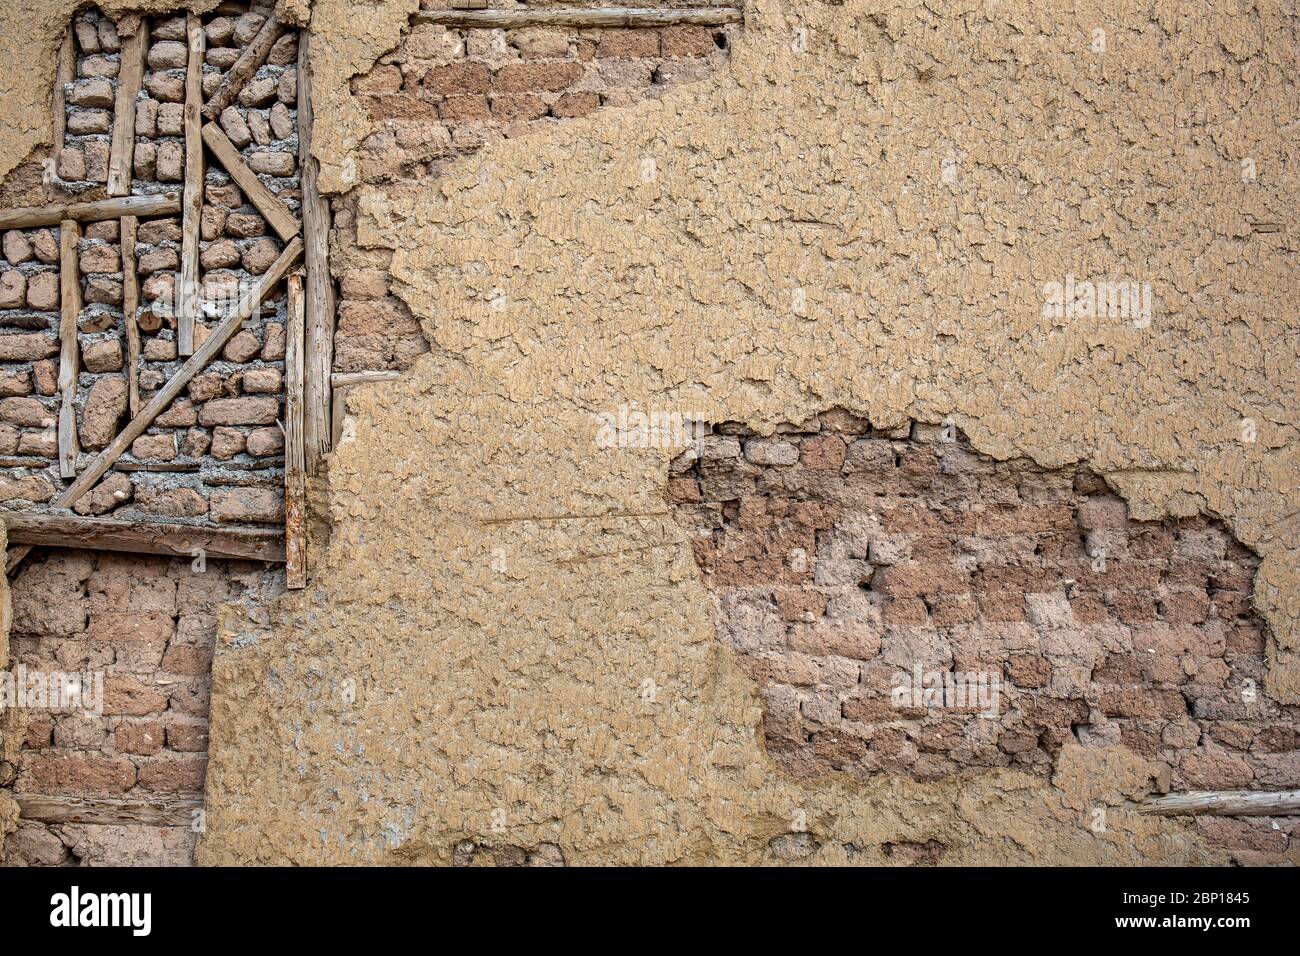 Detail from the weathered mud brick wall of an old house in Odun Pazari district of Eskisehir, Turkey. Stock Photo